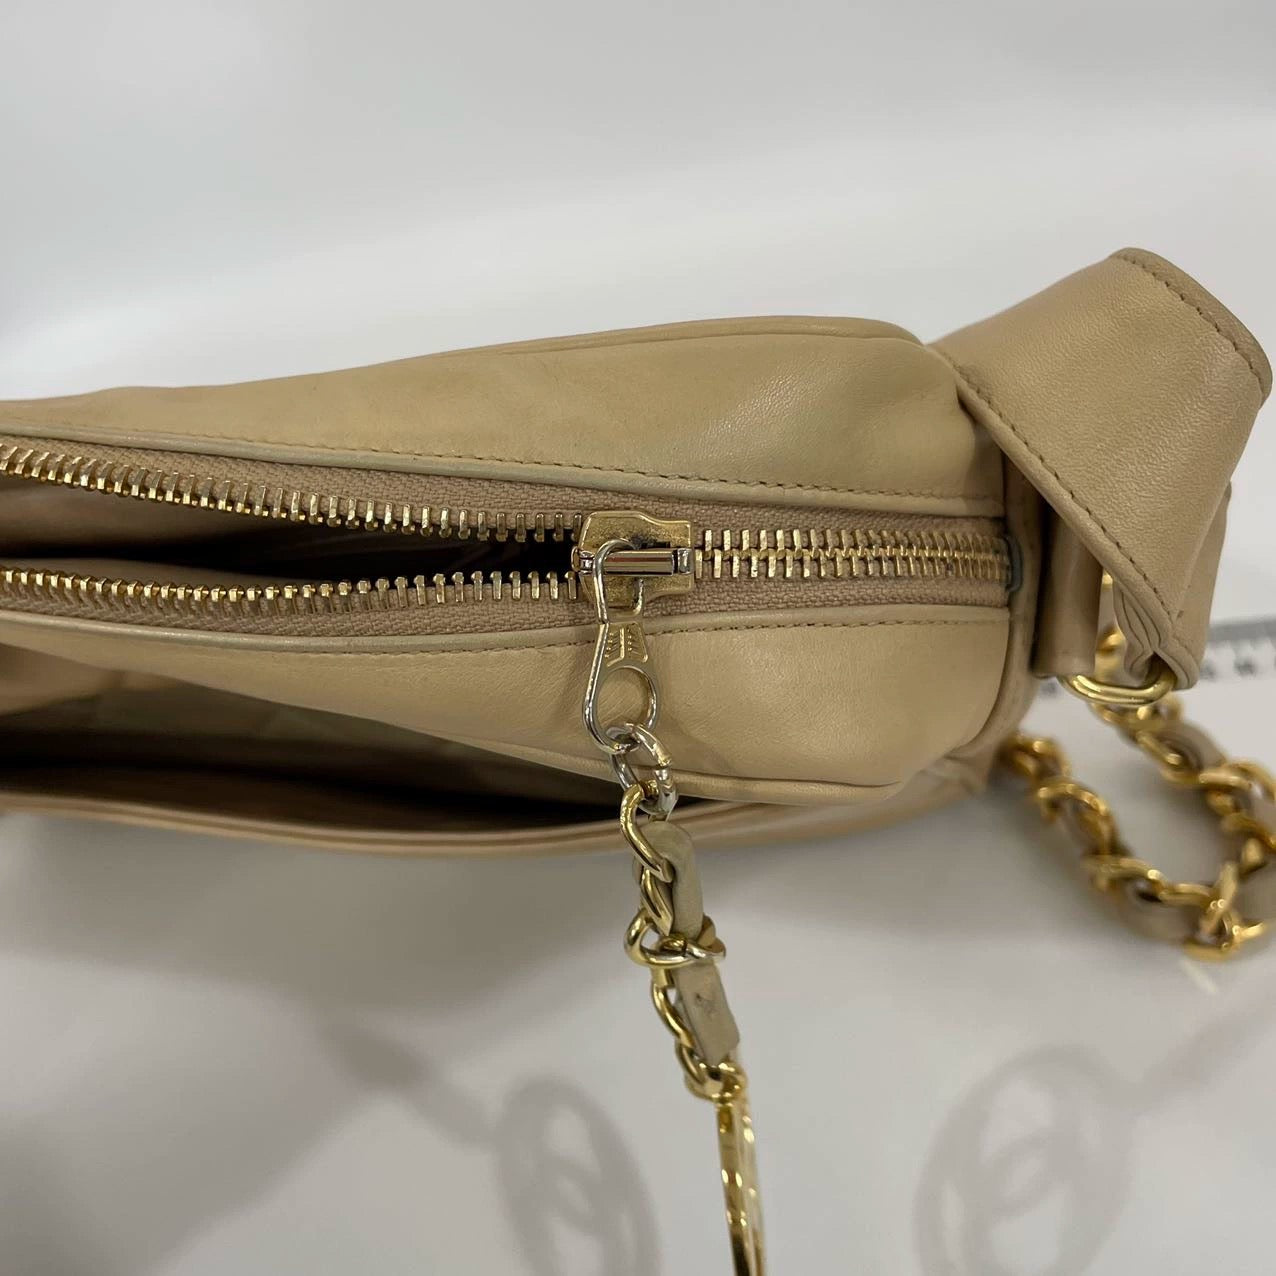 Timeless Classic or Nostalgic Throwback: Is The City Bag a Good Investment?  - PurseBlog